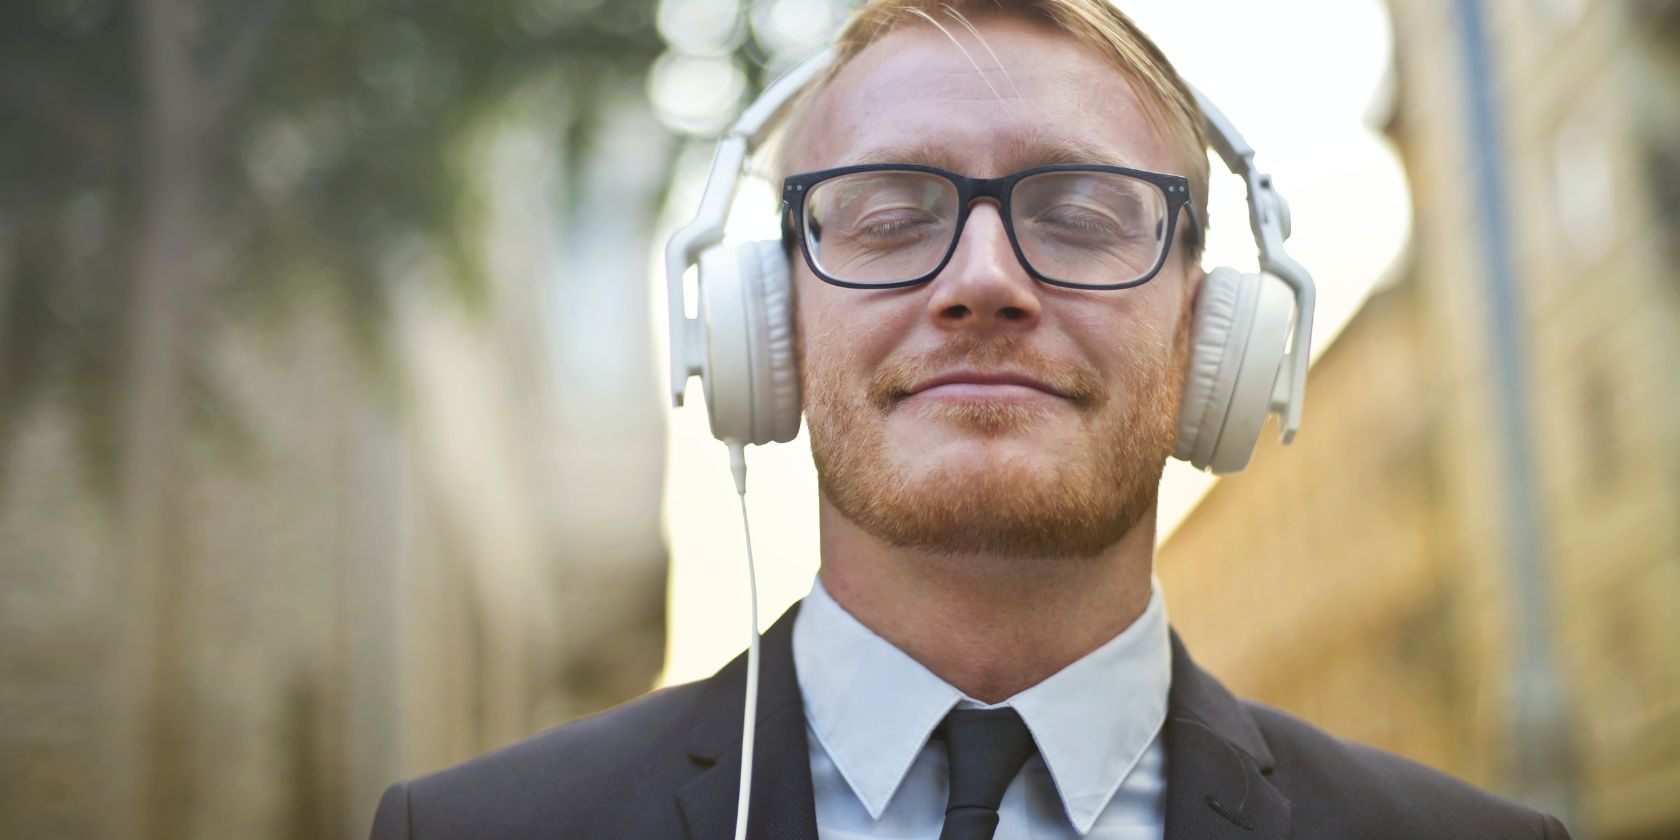 Smiling man enjoying music on his headphones and wearing a business suit